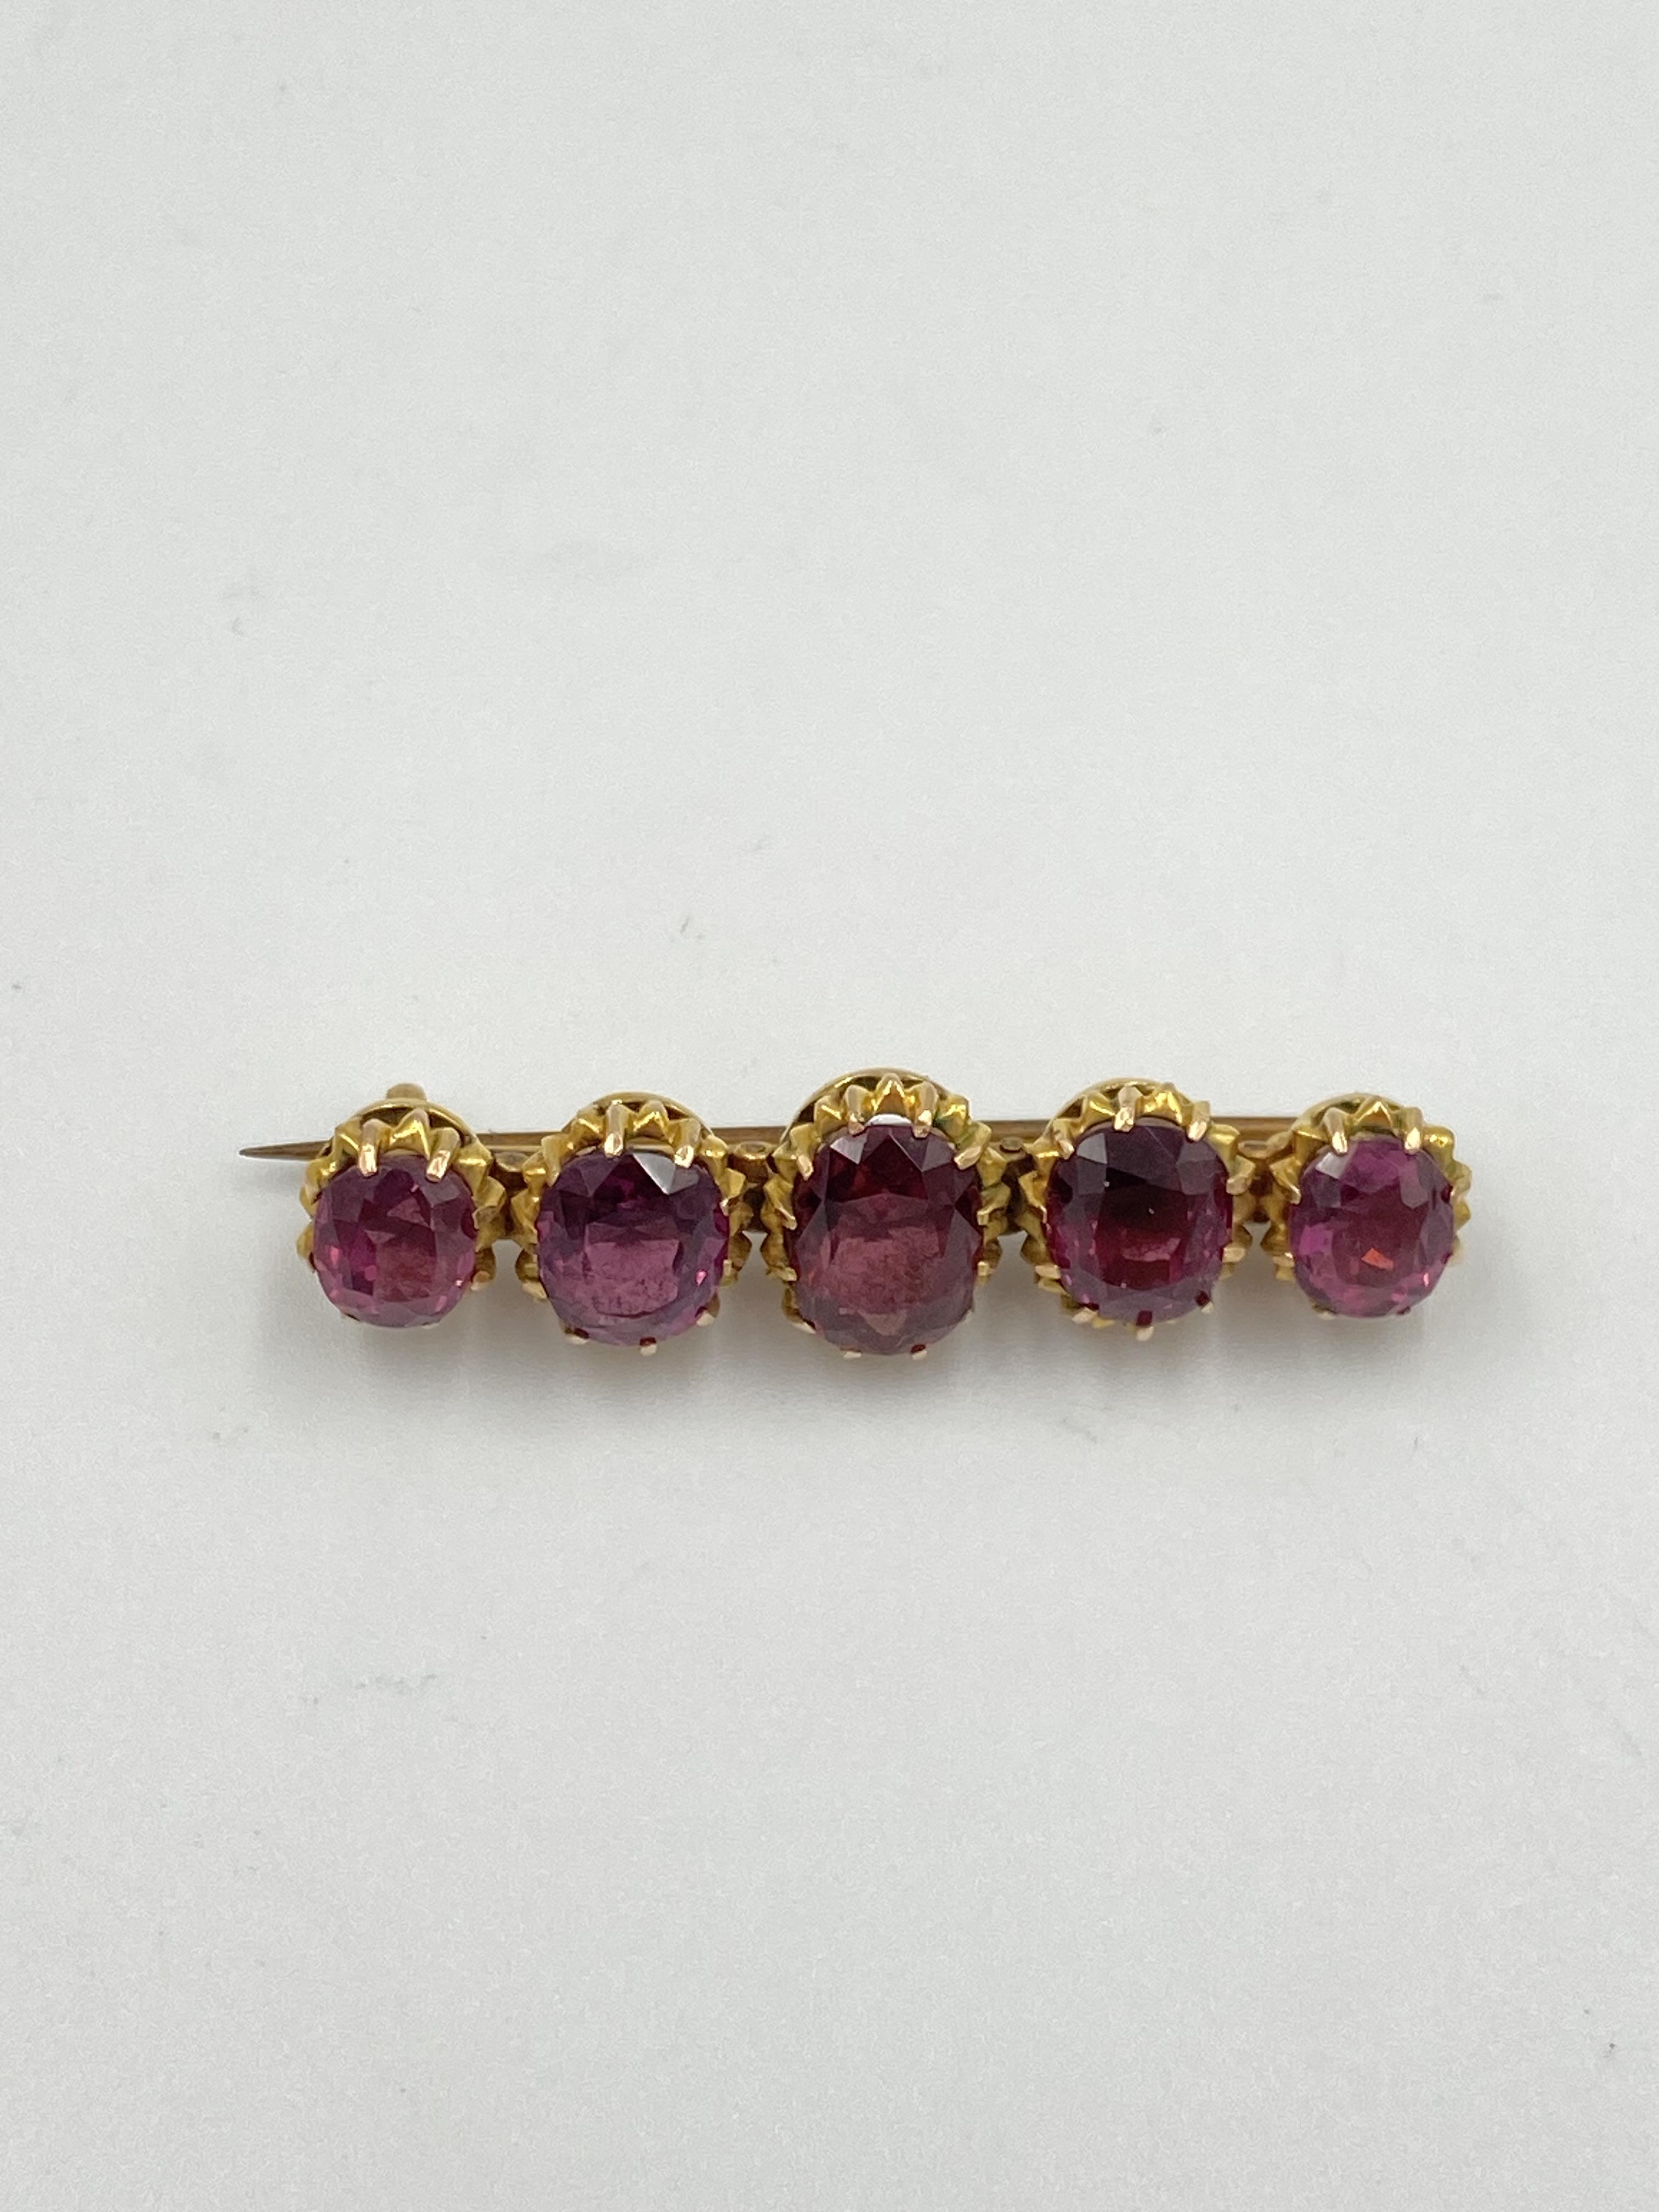 9ct gold and tourmaline brooch - Image 6 of 6